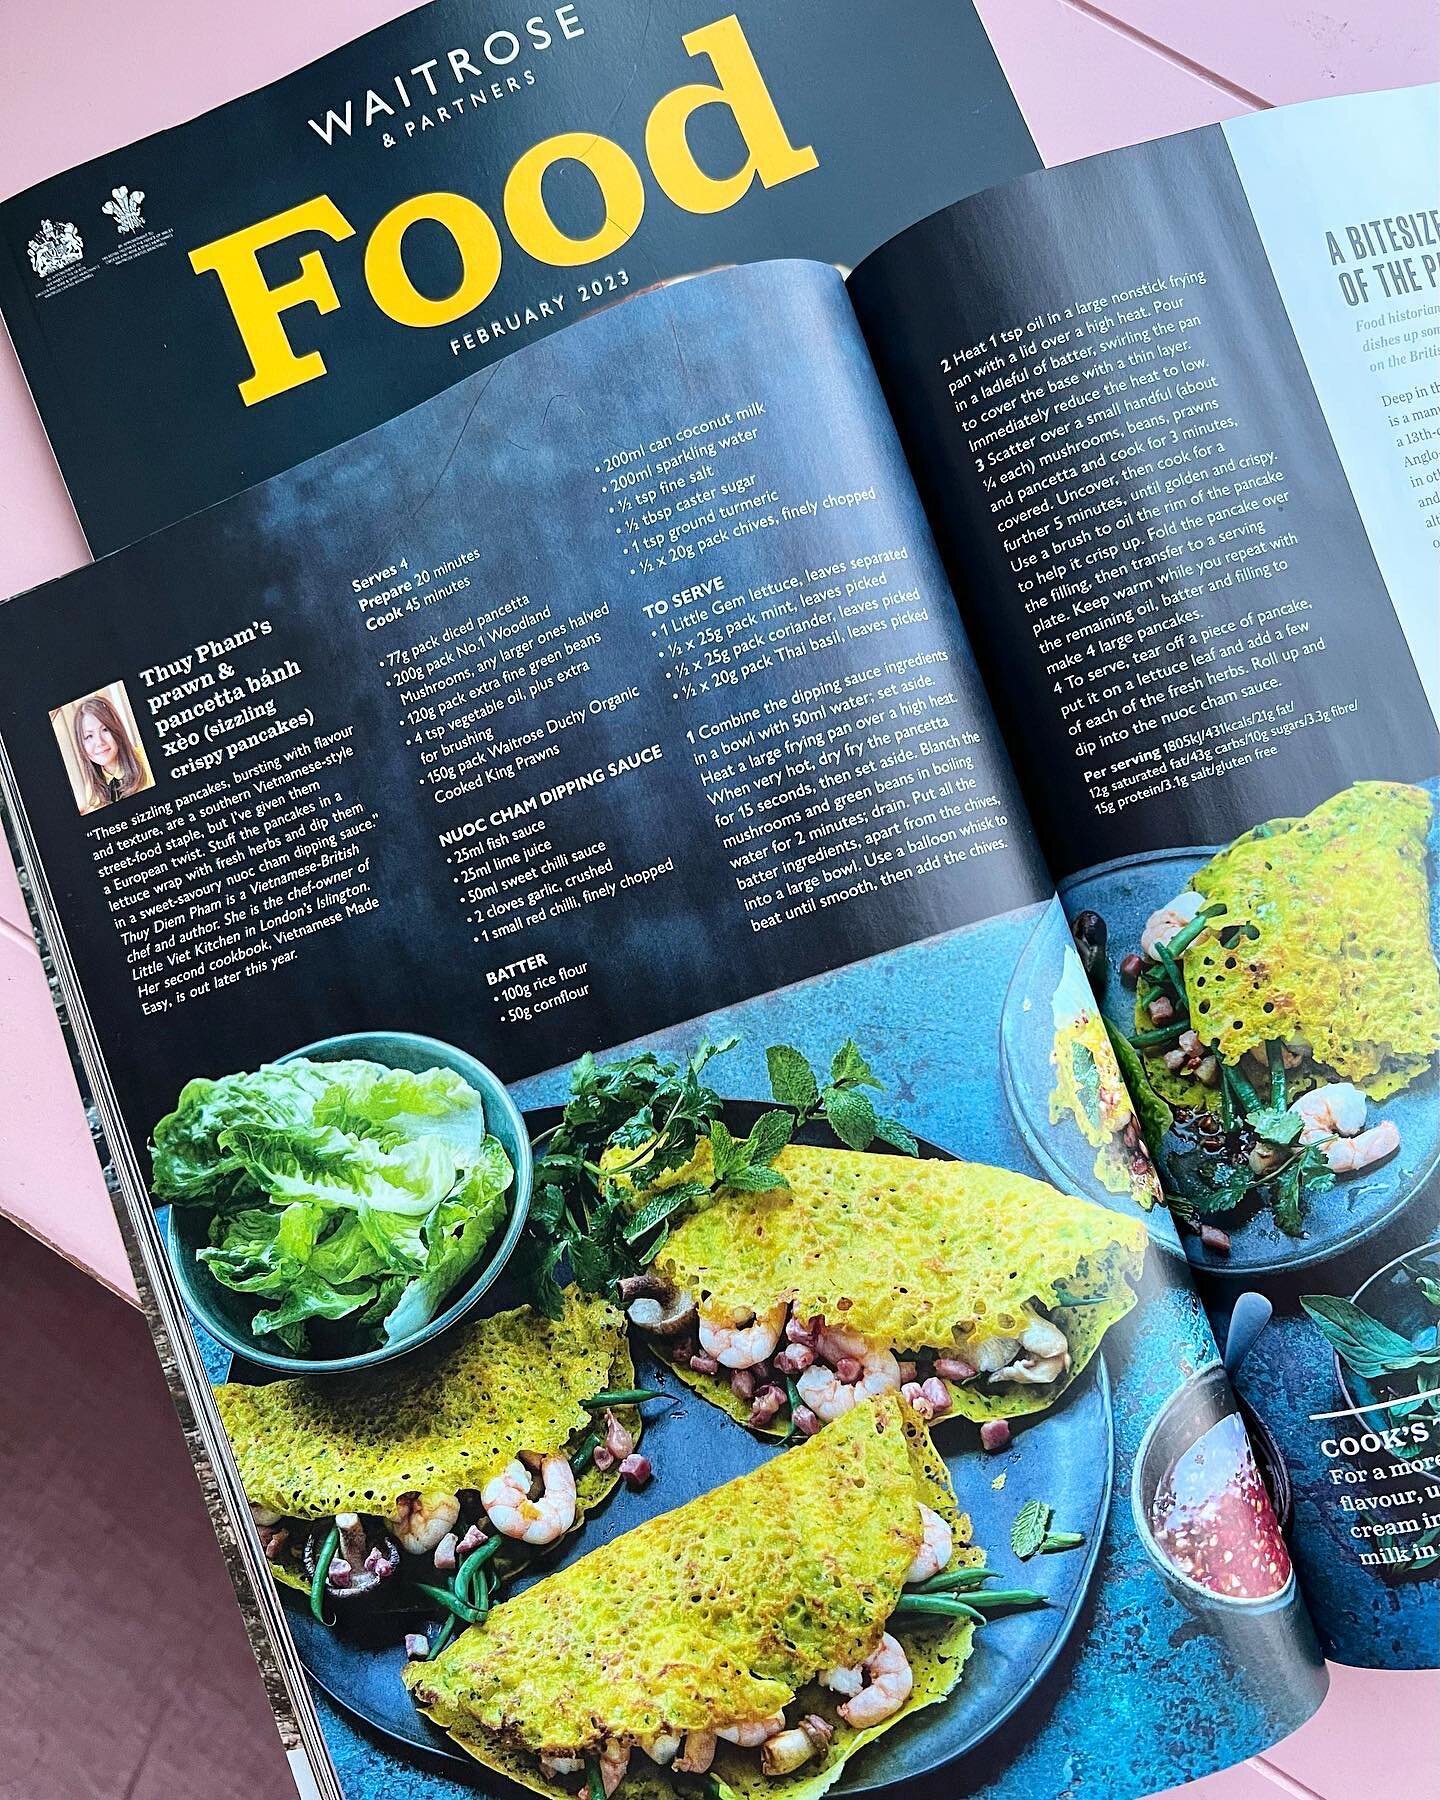 💥 HURRY!!!💥 Everyone in the UK, go get a copy of WAITROSE Feb magazine. You&rsquo;re in for a treat with @chef_thuy_pham&rsquo;s #b&aacute;nhx&egrave;o recipe! 🥞 @waitrose @waitrosepr 
-
-
-
Credits to the amazing team below 💚
-
Photograph: @jona